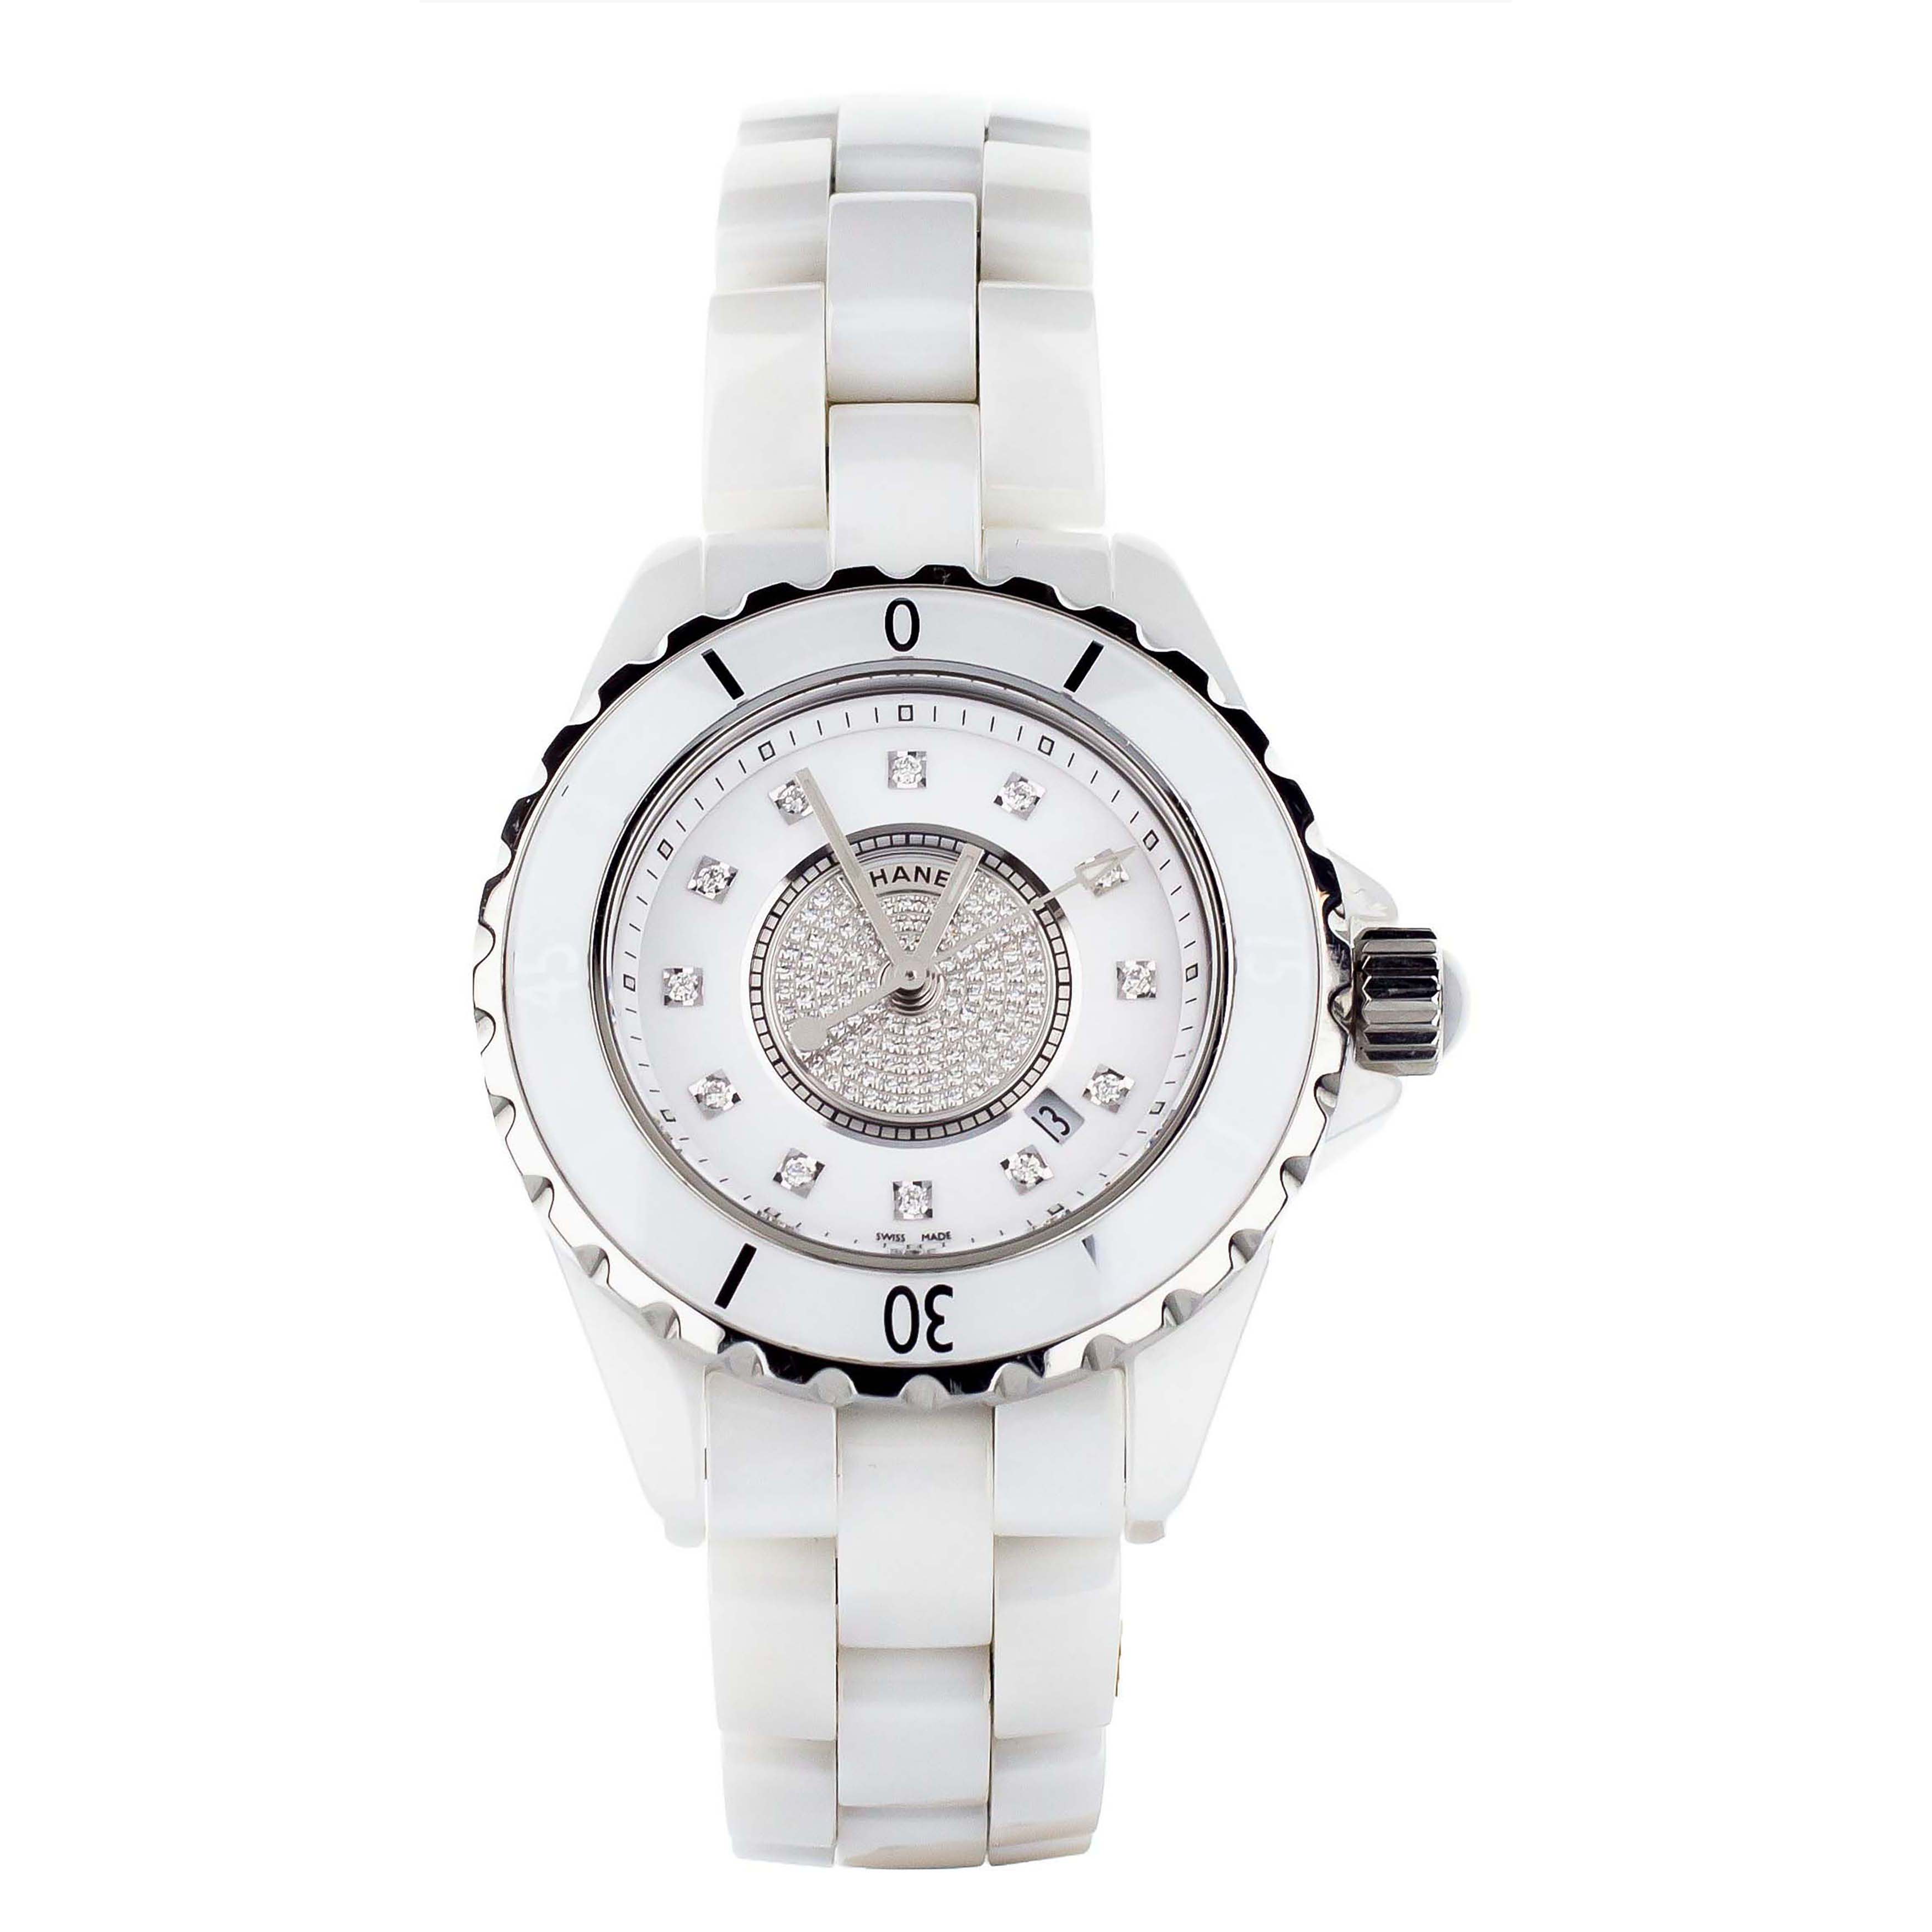 NEW ARRIVAL: Chanel J12 GMT — Life of a WIS